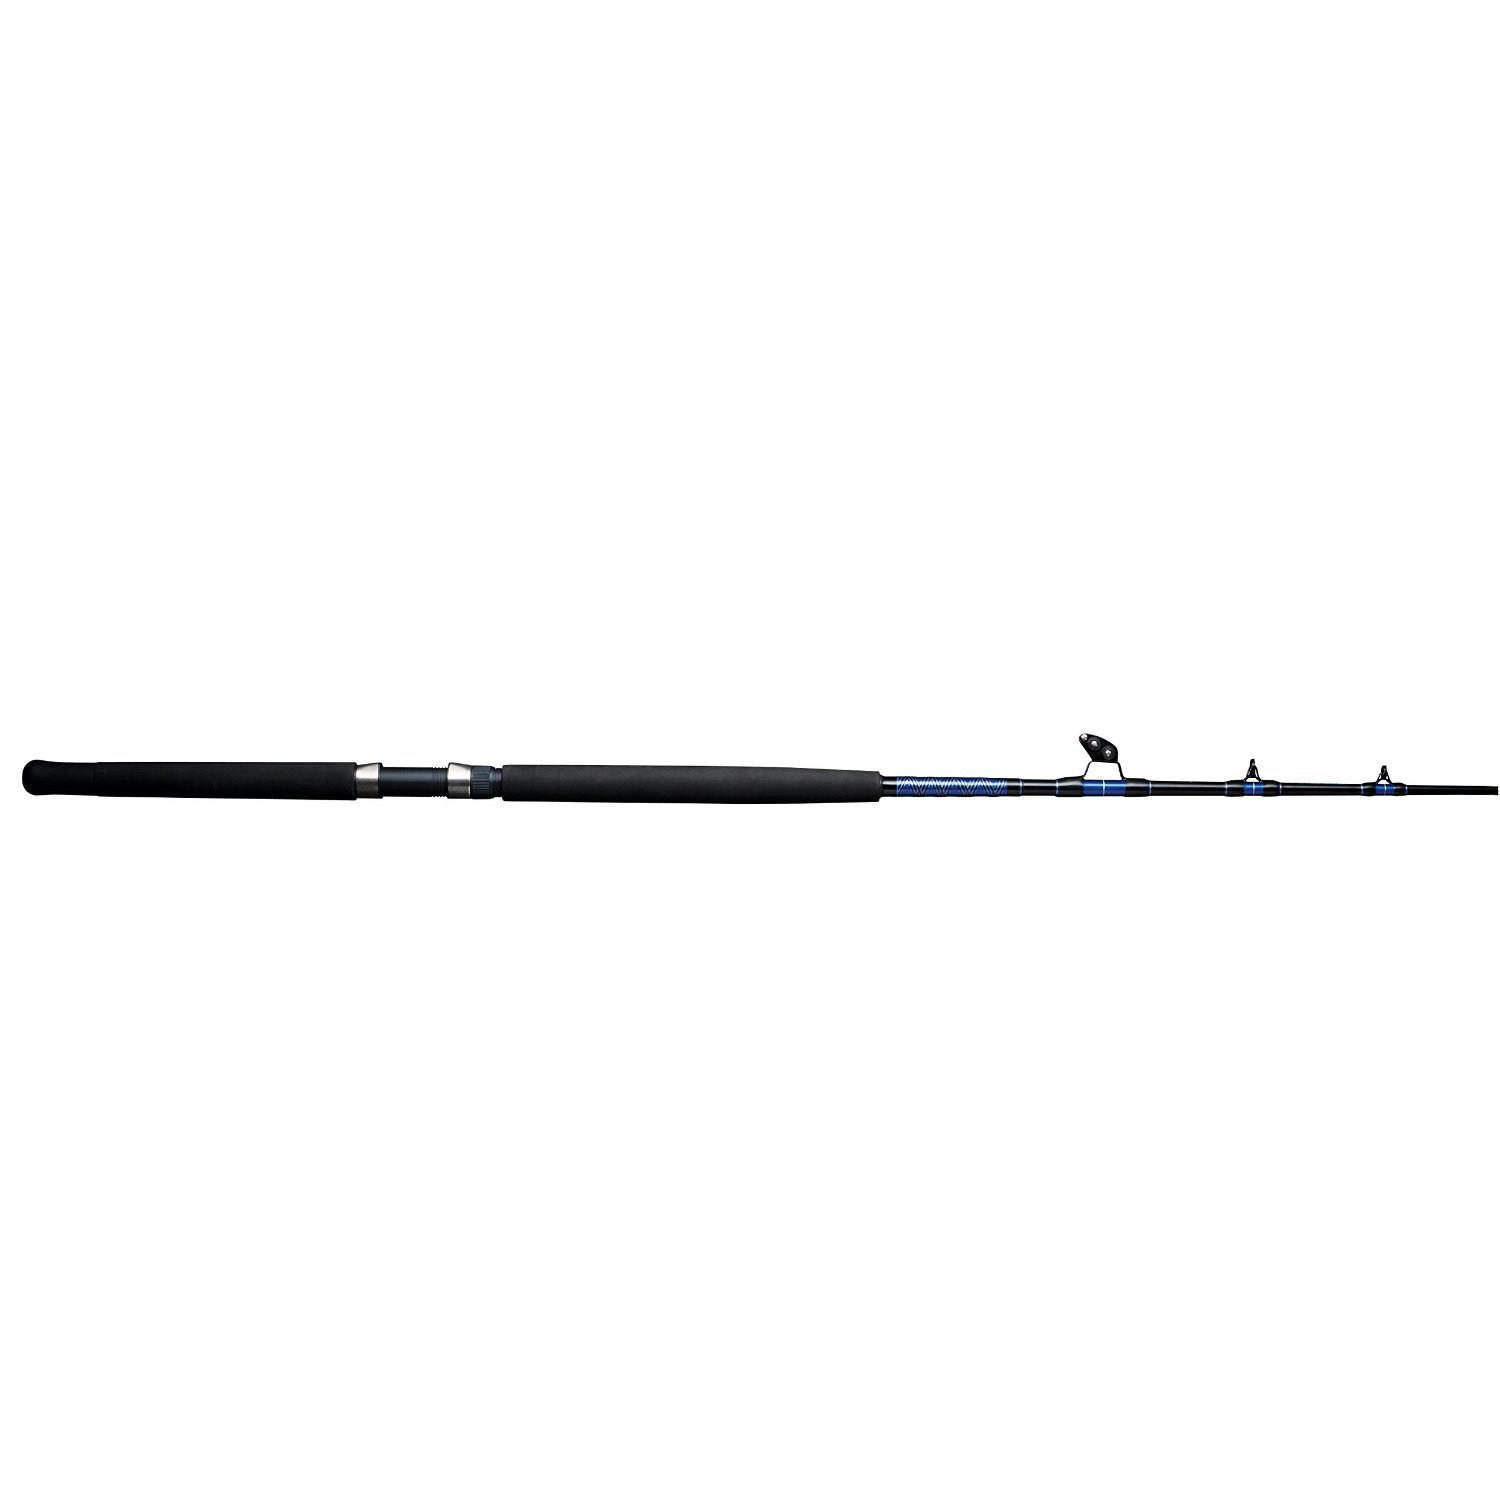 Shakespeare Tidewater Boat Casting Rod - image 2 of 5